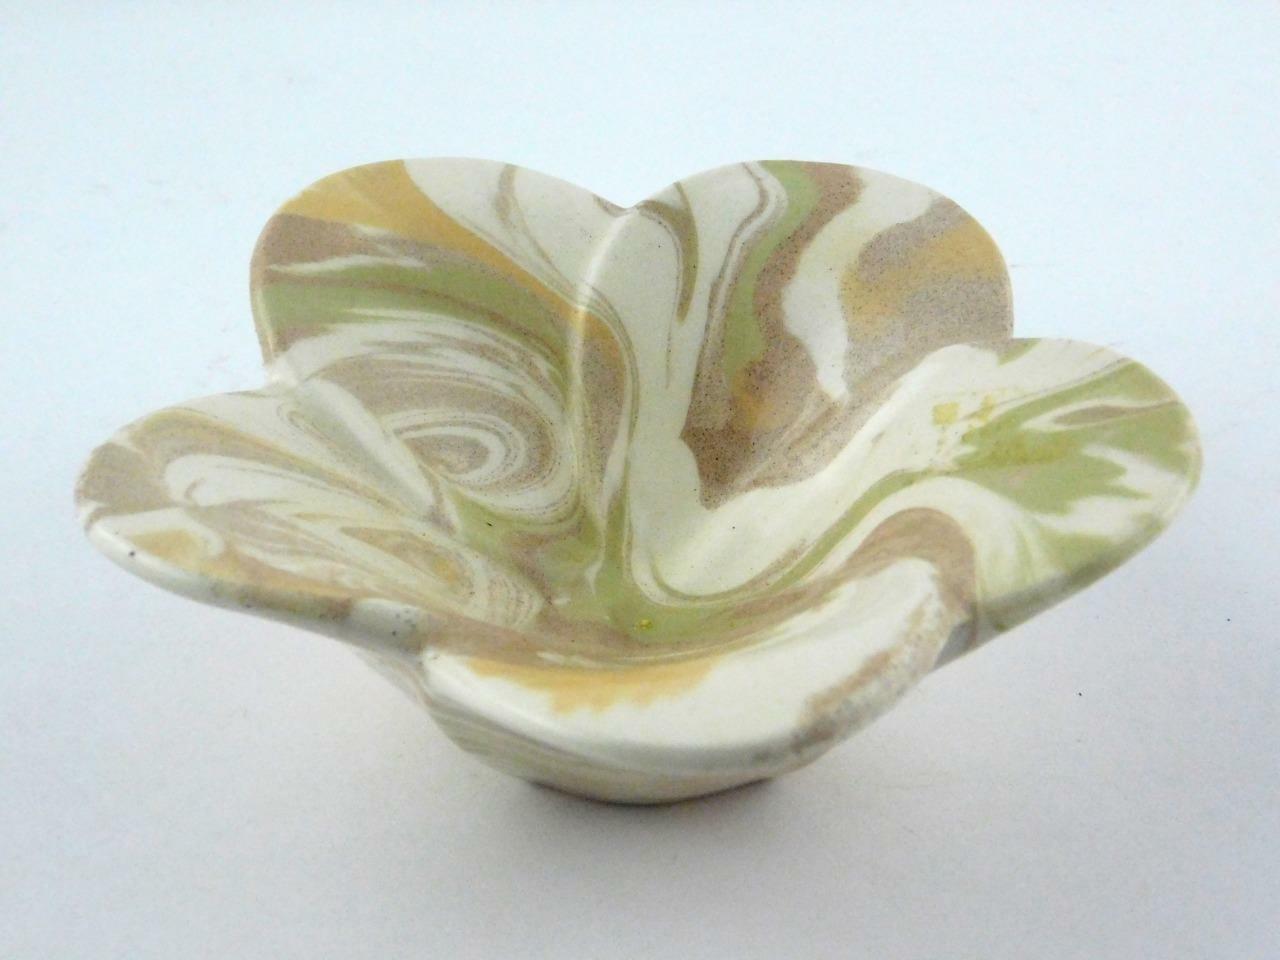 Green yellow and white marbleized flower-shaped pottery bowl